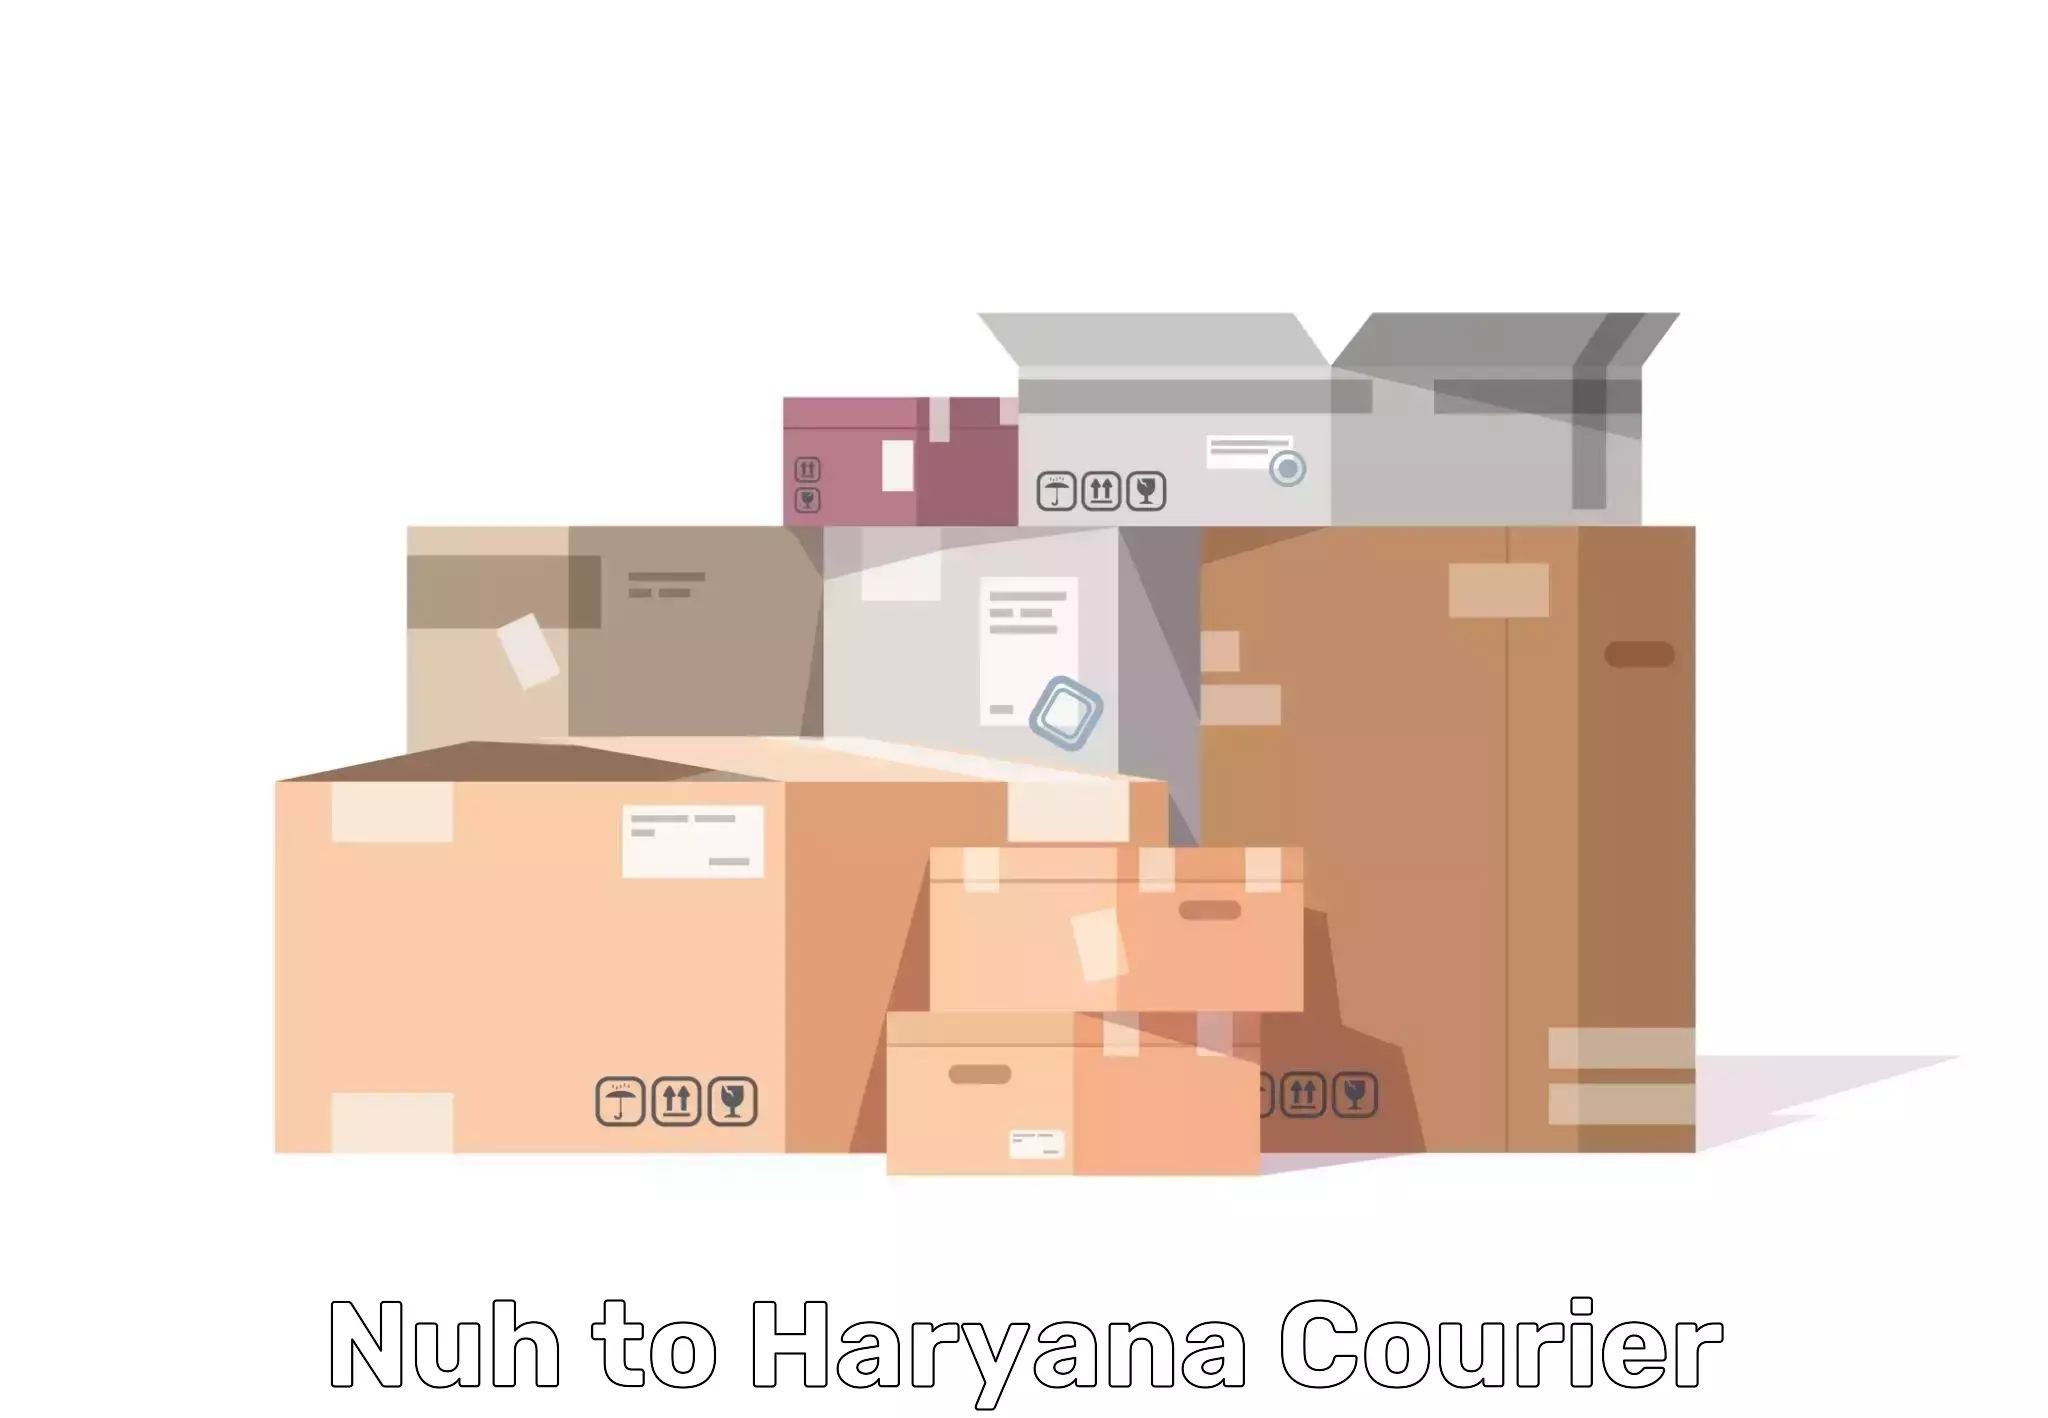 Long-distance household transport Nuh to NCR Haryana